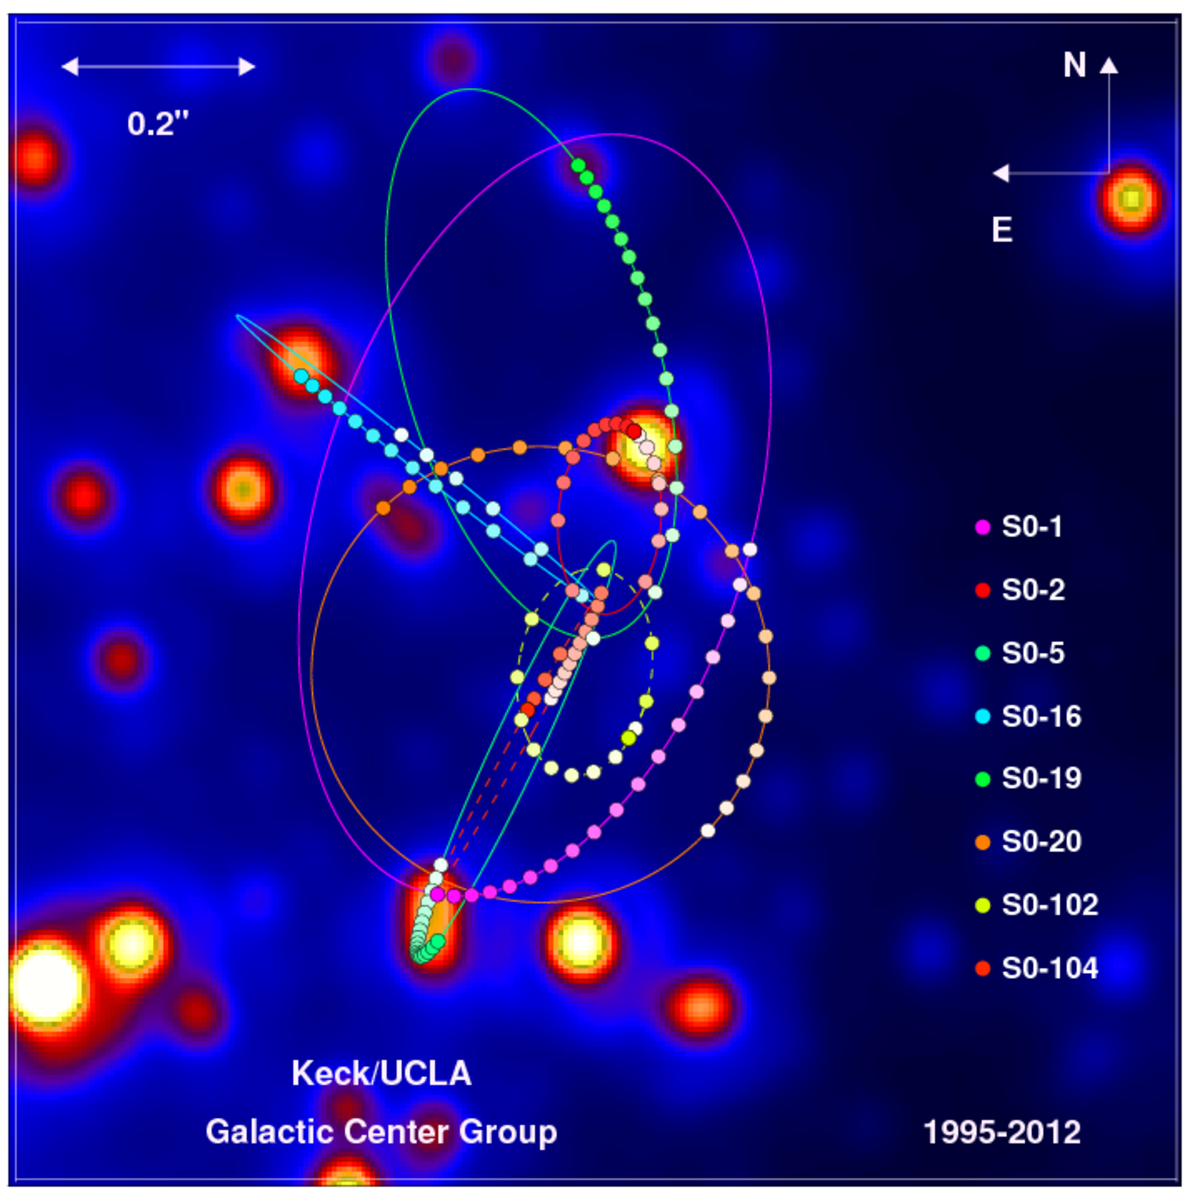 "Created by Prof. Andrea Ghez and her research team at UCLA from data sets obtained with the W.M. Keck Telescopes."